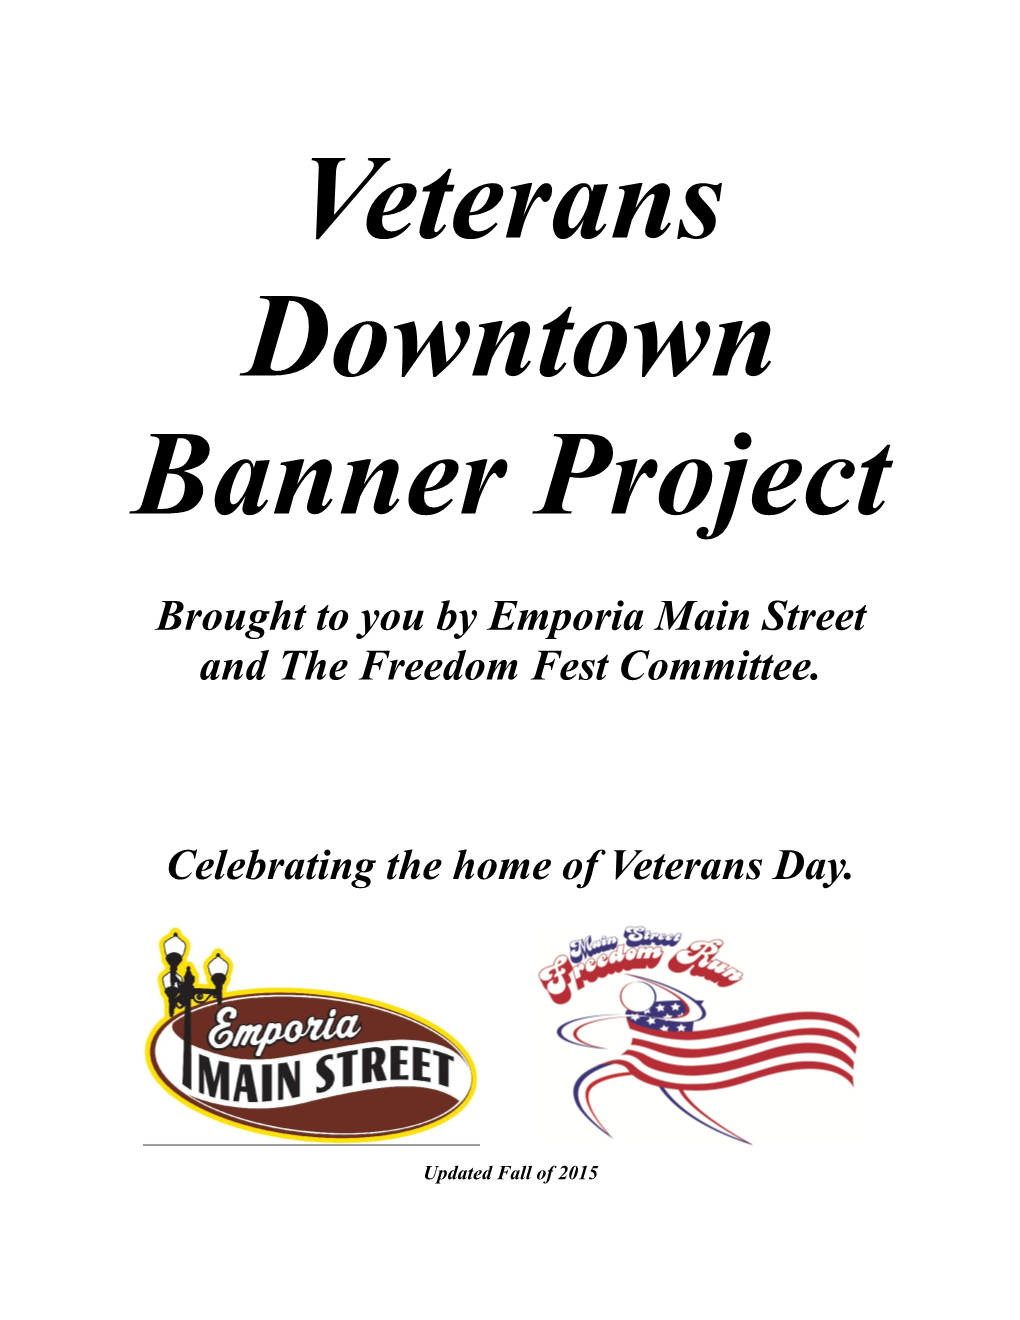 Veterans Downtown Banner Project